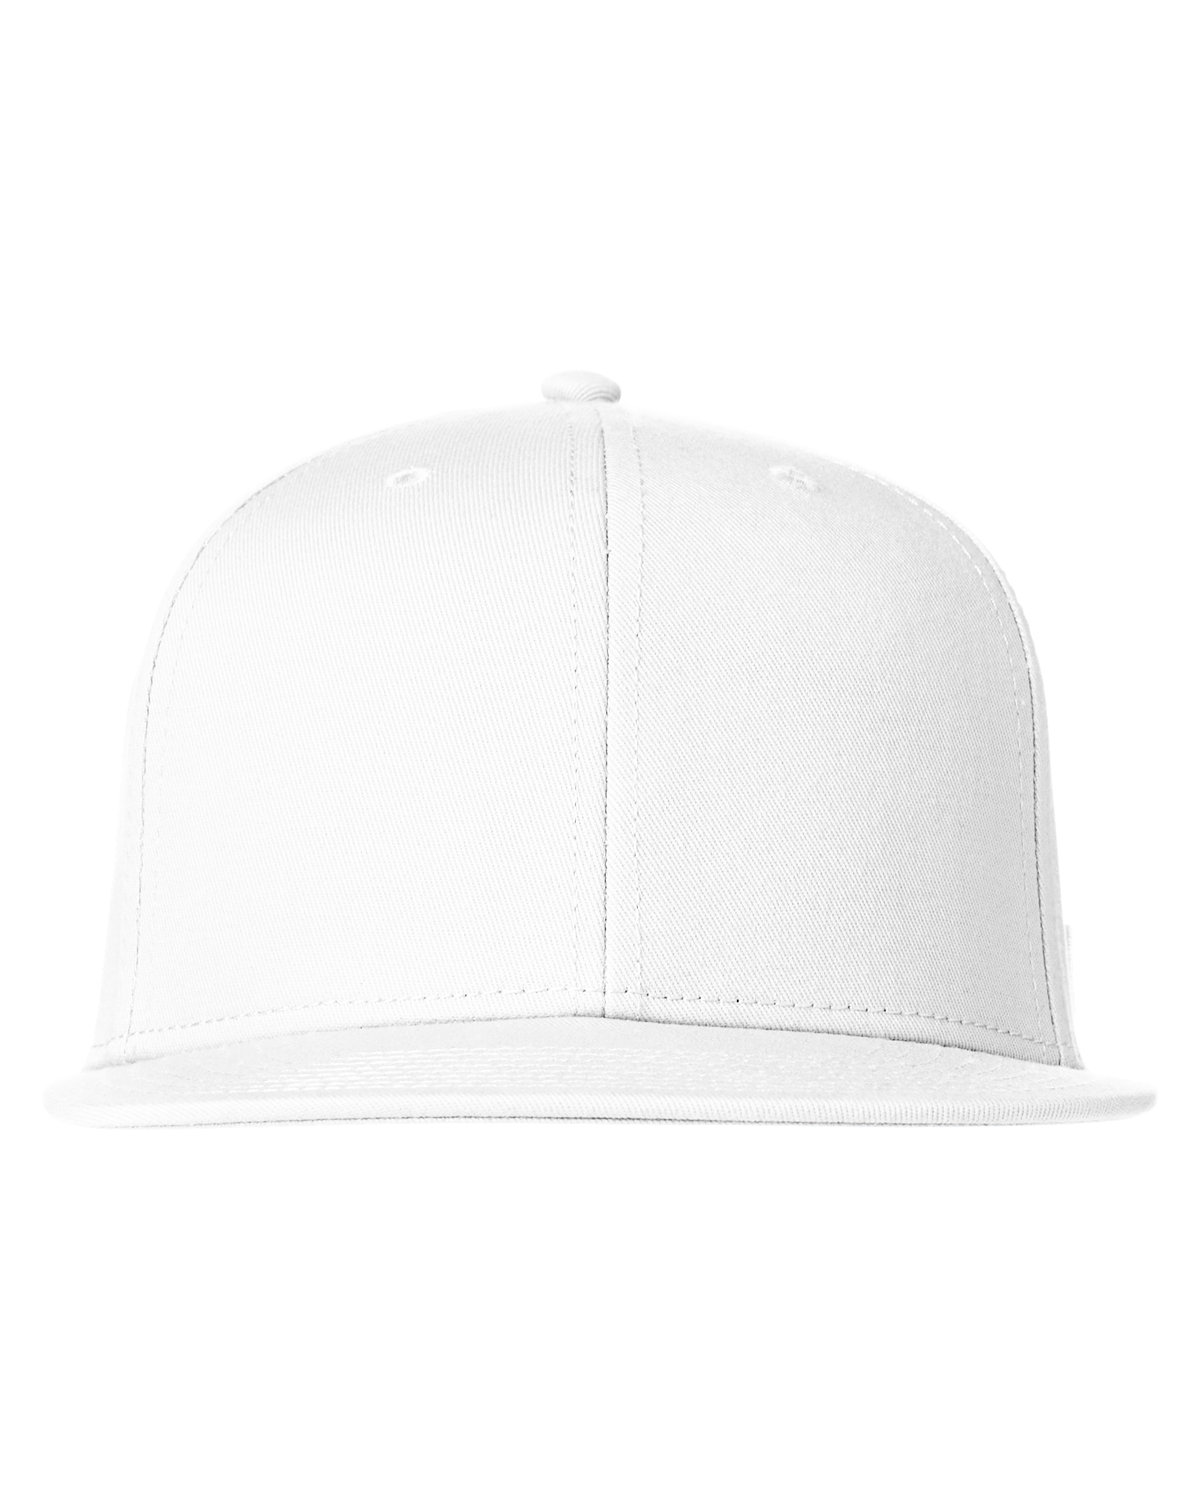 R Snap Cap-Russell Athletic